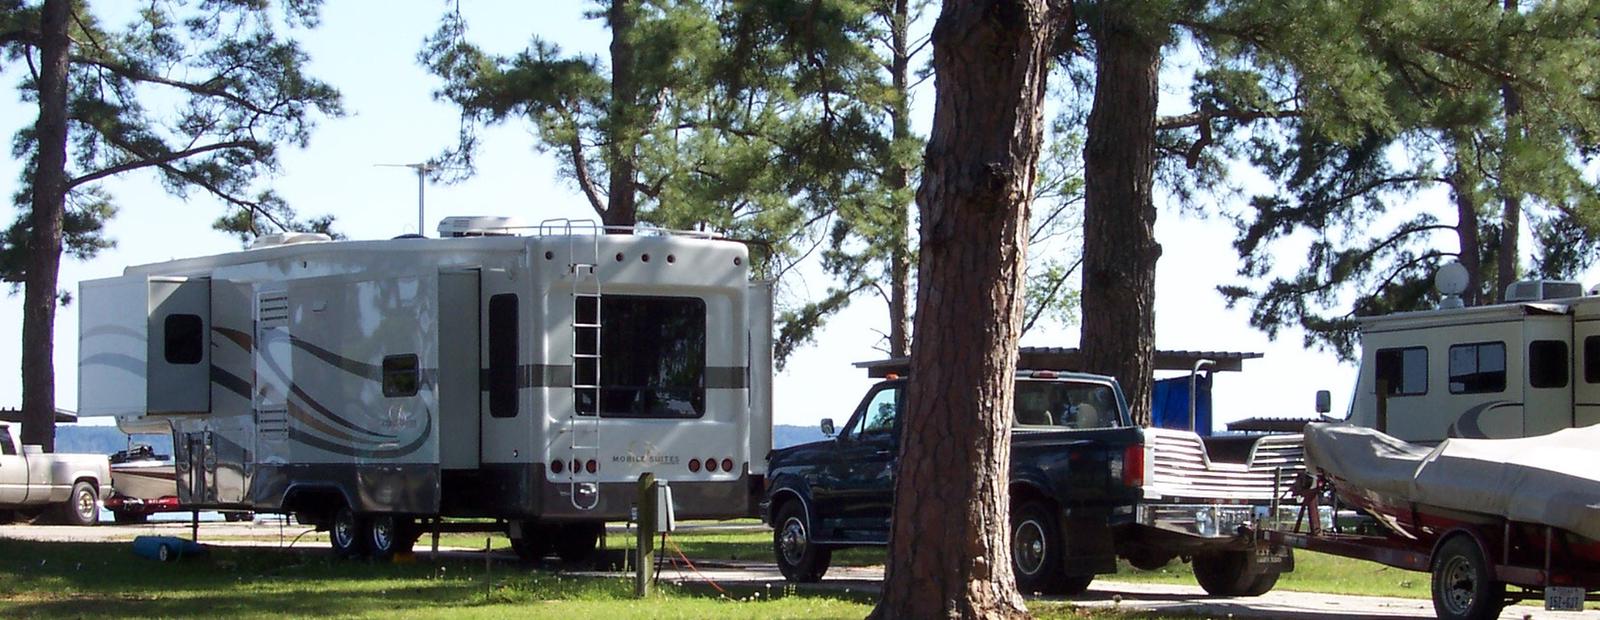 Mill Creek (Texas) Campground, Sam Rayburn, Texas REI Camping Project